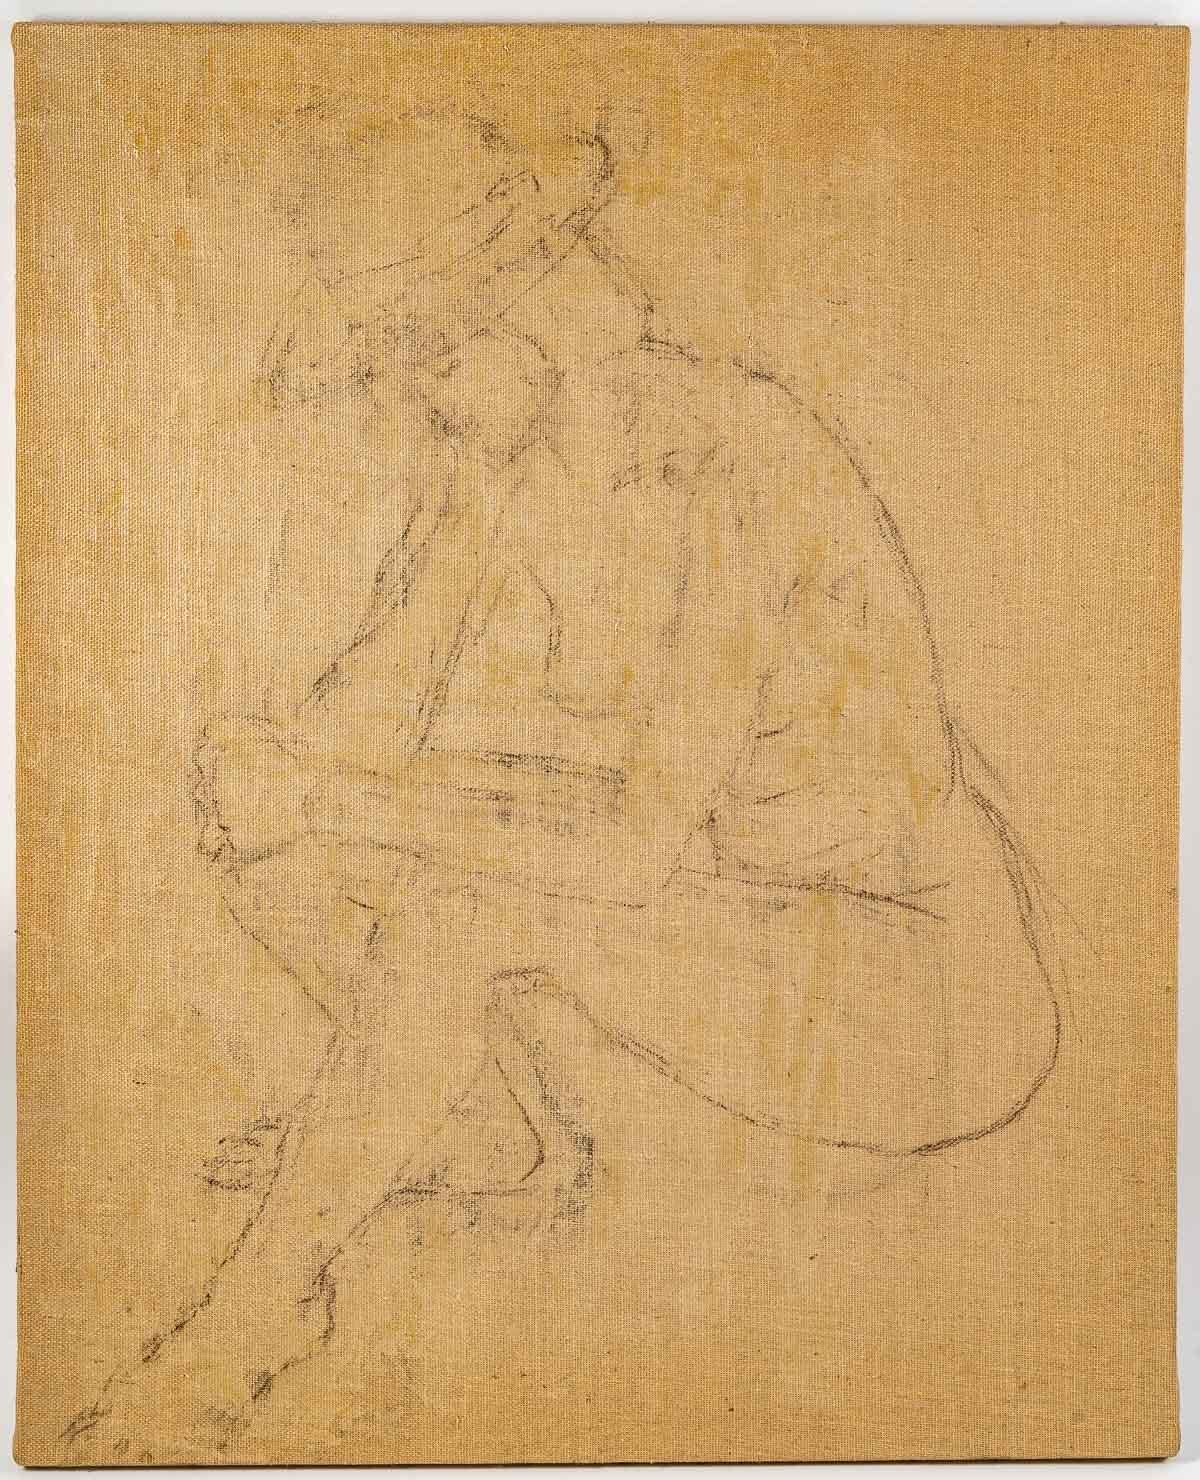 Drawing in Transparency, 20th century
Transparency drawing on canvas, 20th century, unsigned, unframed.
Measures: H: 100 cm, W: 81 cm, D: 2 cm.